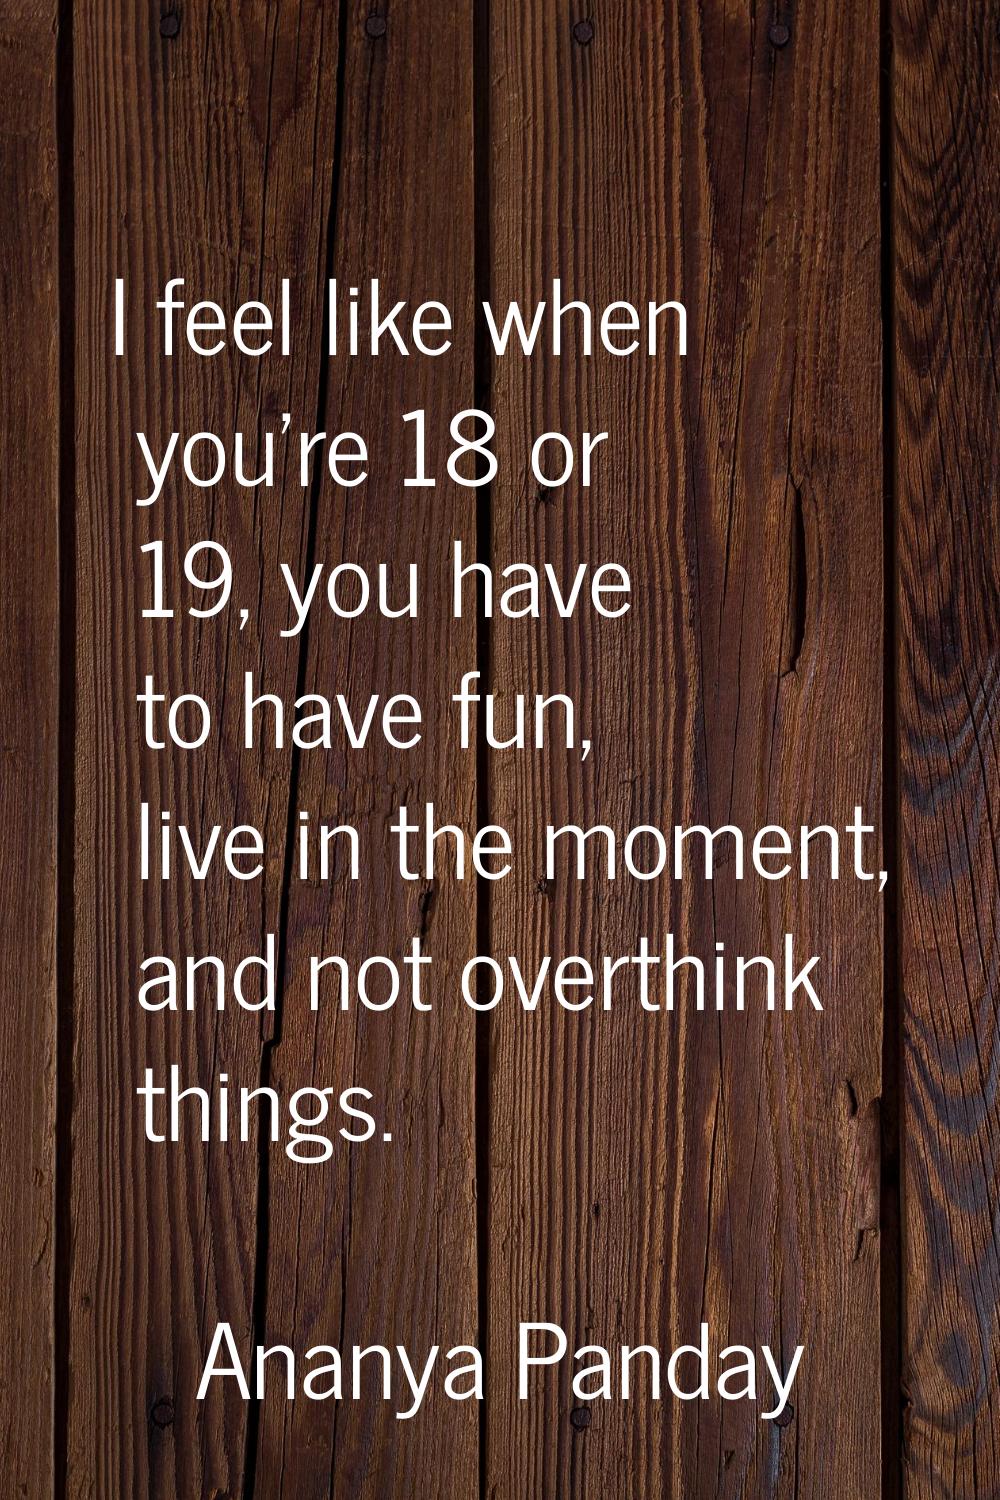 I feel like when you're 18 or 19, you have to have fun, live in the moment, and not overthink thing